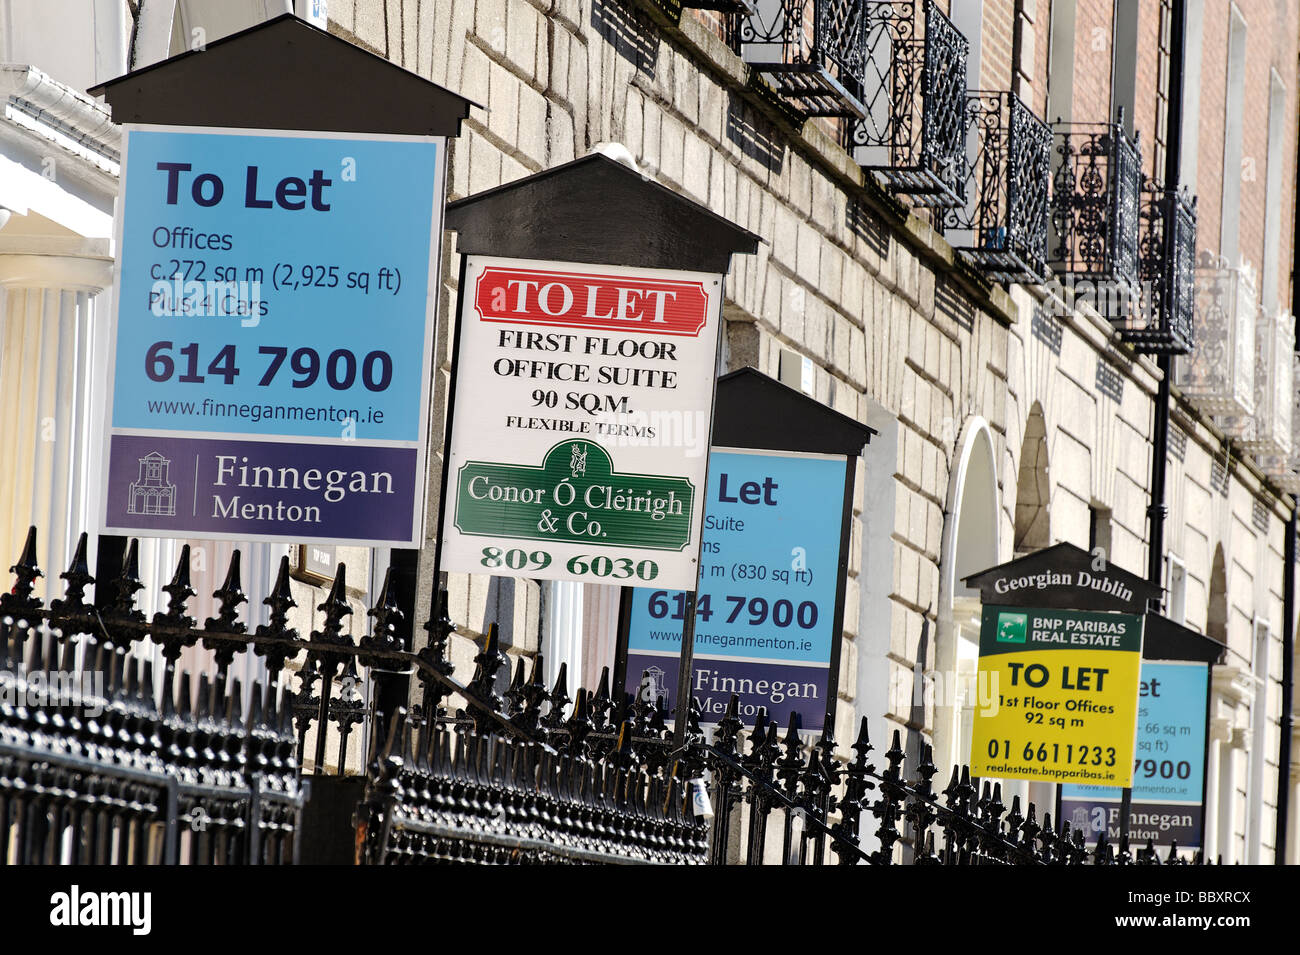 Estate agents To Let signs in central Dublin Republic of Ireland Stock Photo